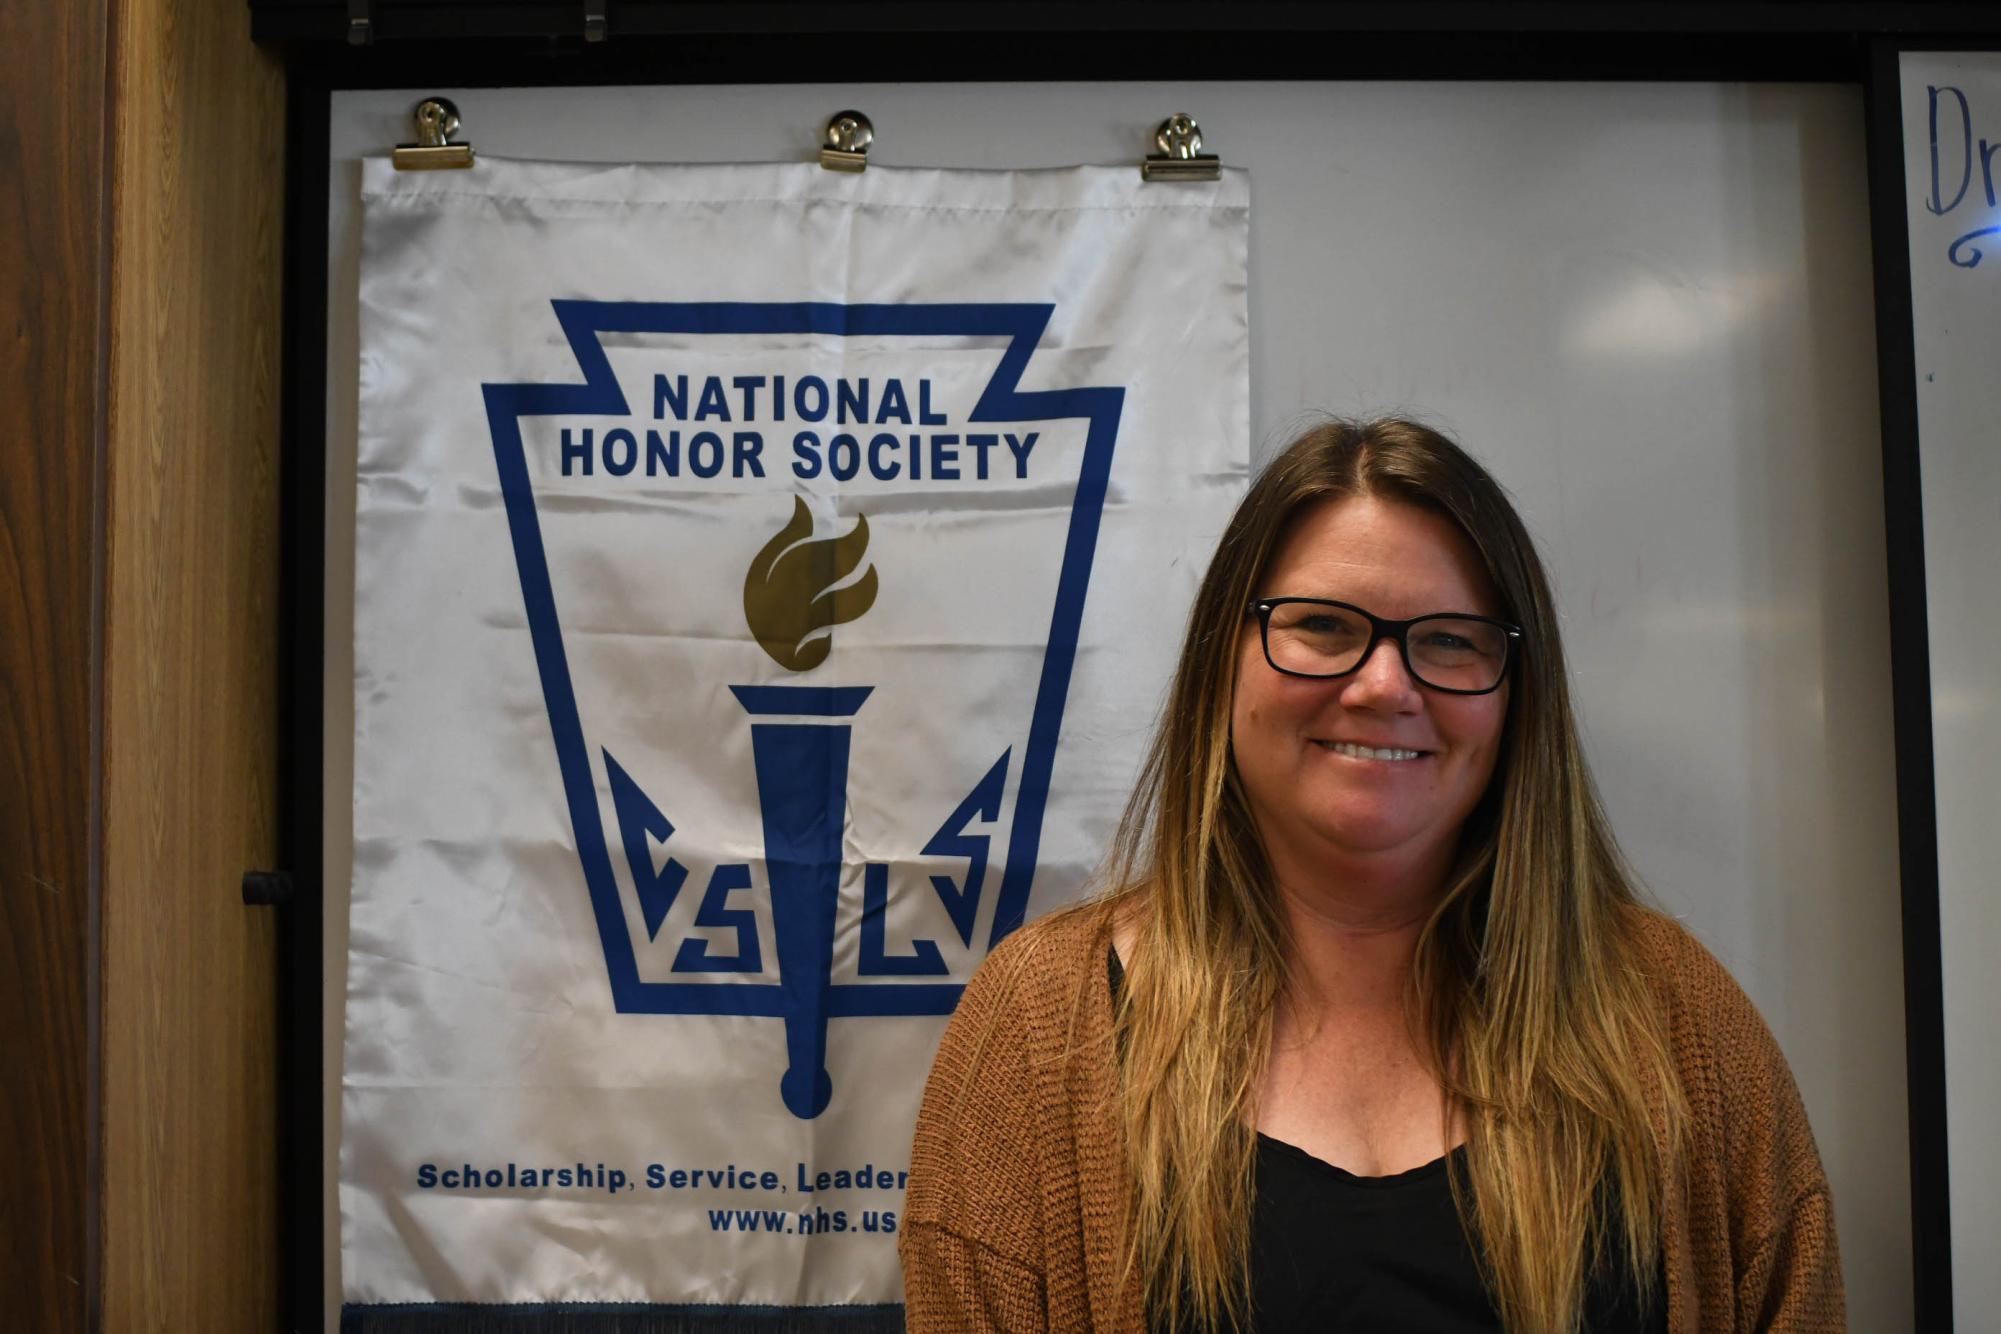 New National Honors Society Adviser, Crystal Stevenson is excited to commence her first year at SJHHS. AS the Adviser she looks to uphold the four pillars that the organization is rooted in. “The focus is the four pillars, which are scholarship, character, service, and leadership,” said Stevenson.